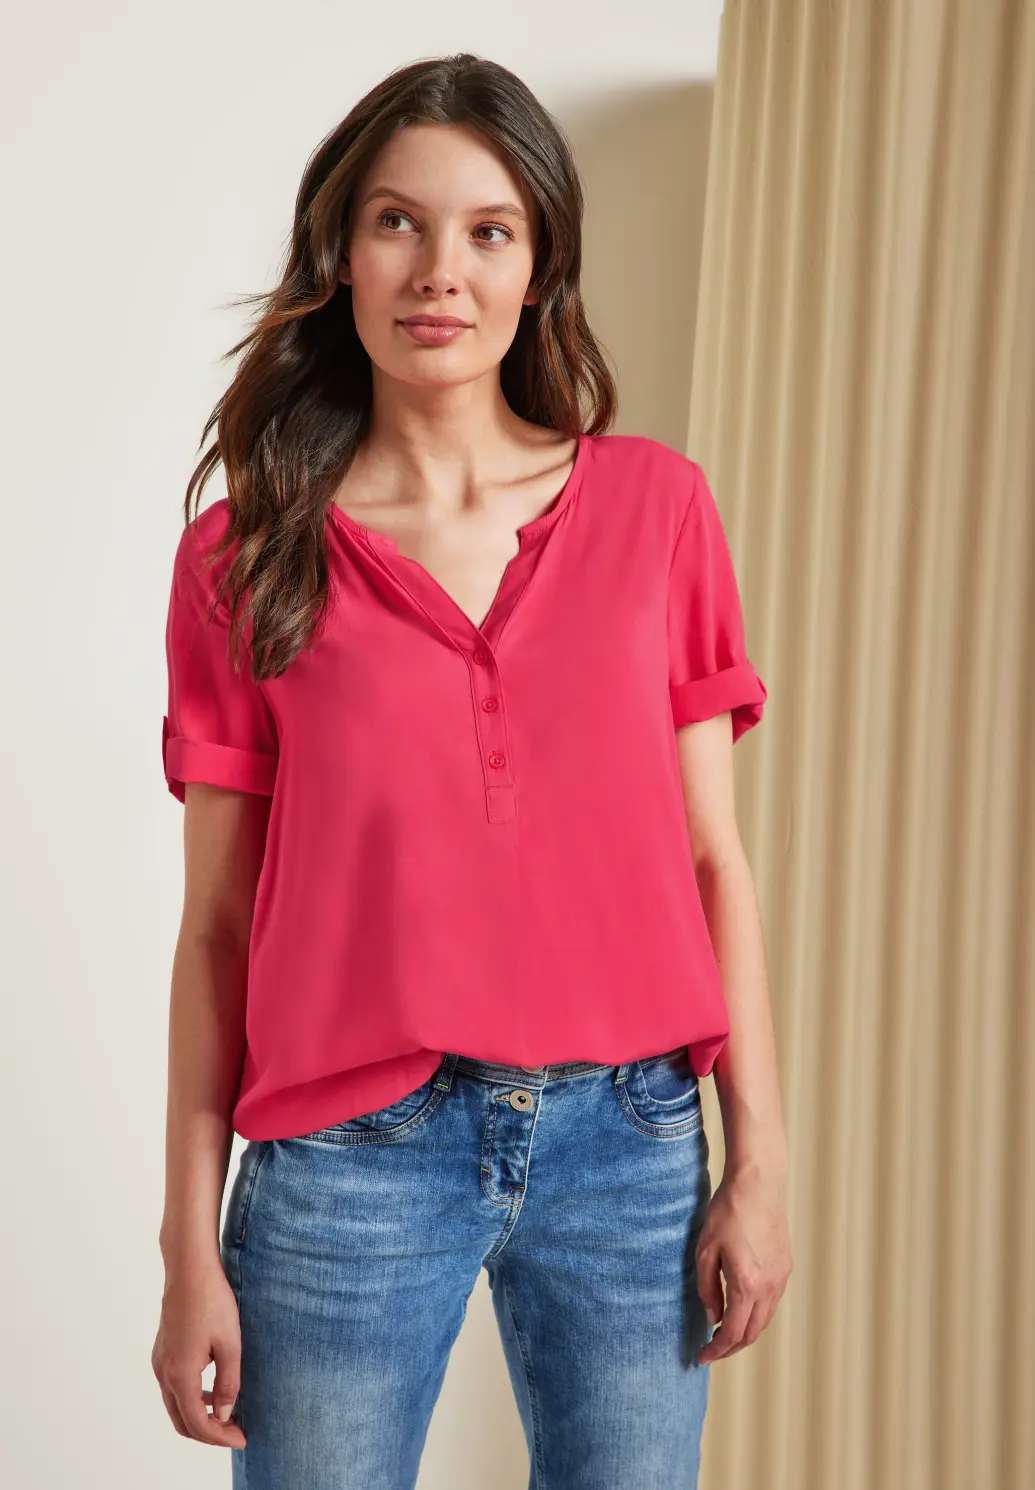 CECIL - | Cotton / Basic Blues Bluse Rot Unifarbene Red - Strawberry